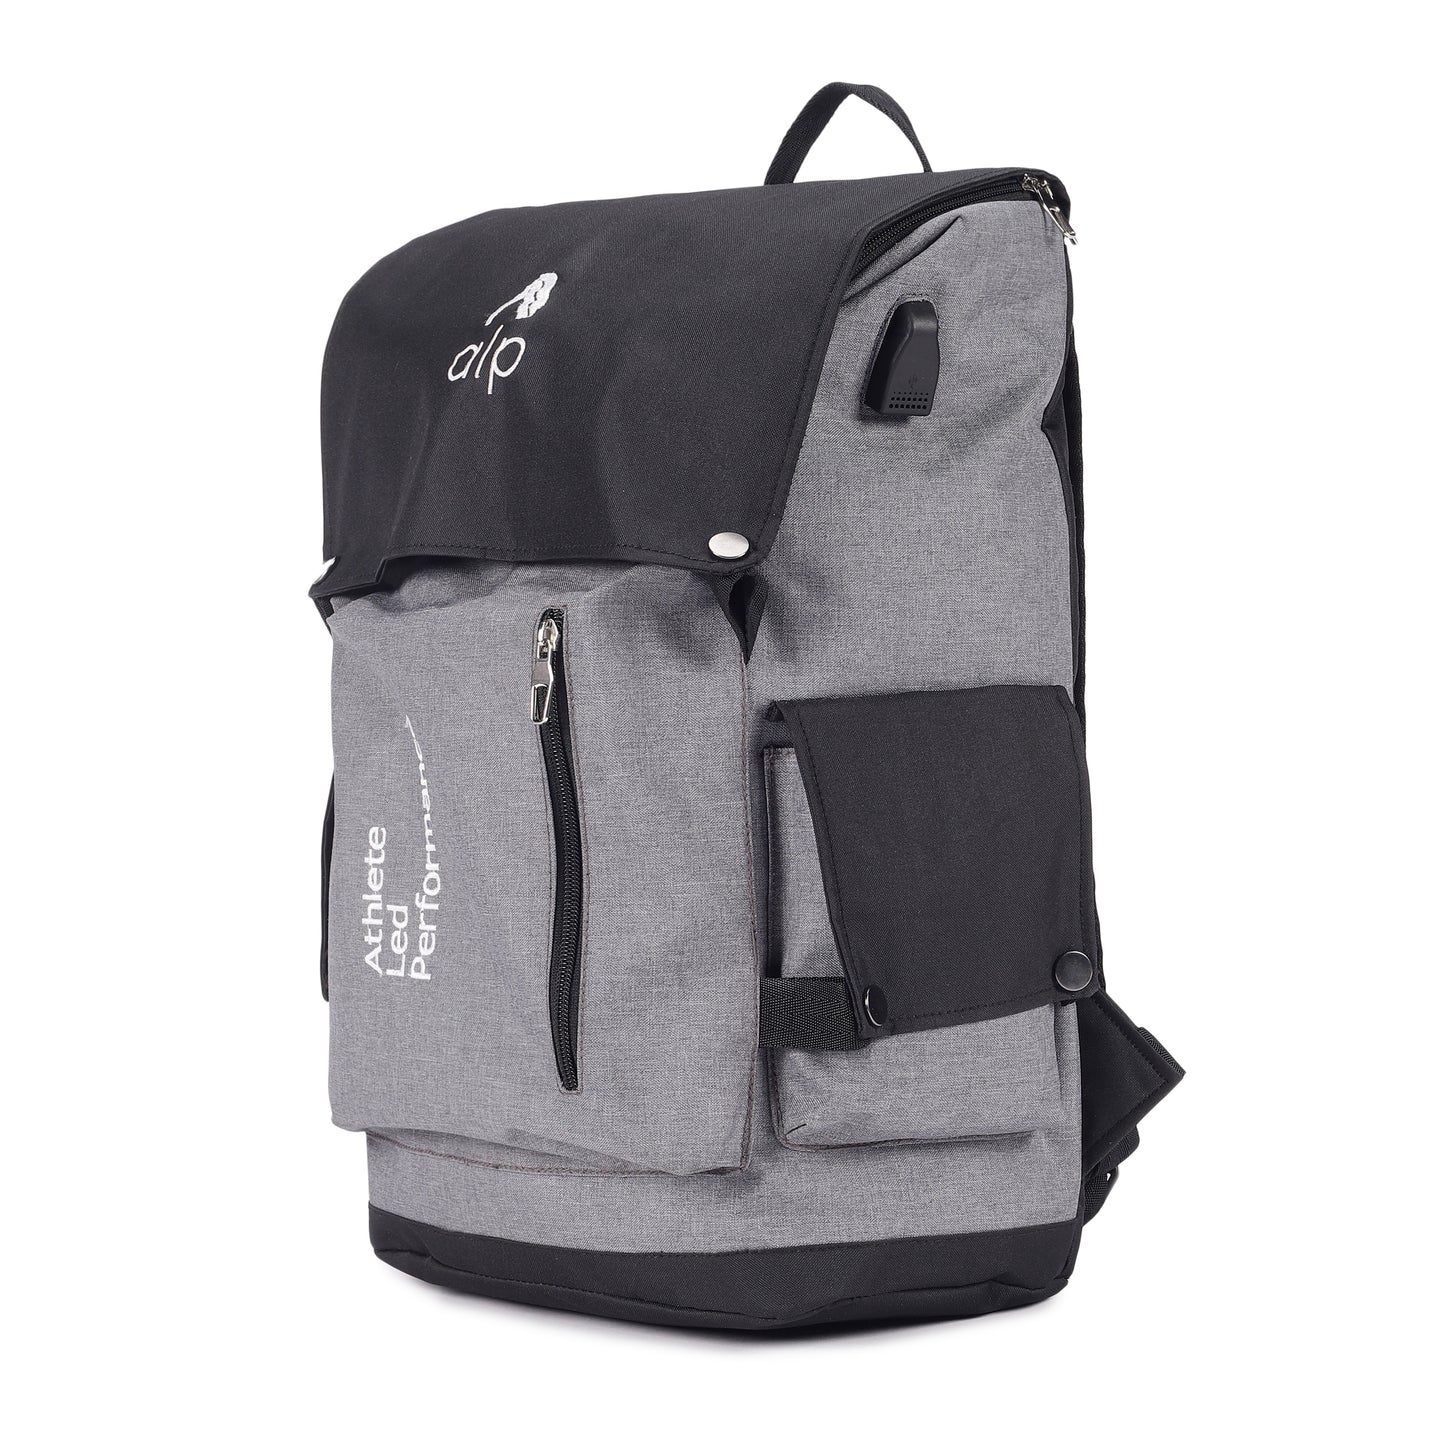 Buy Traverse Backpack Online for Travel & Outdoor - Grey